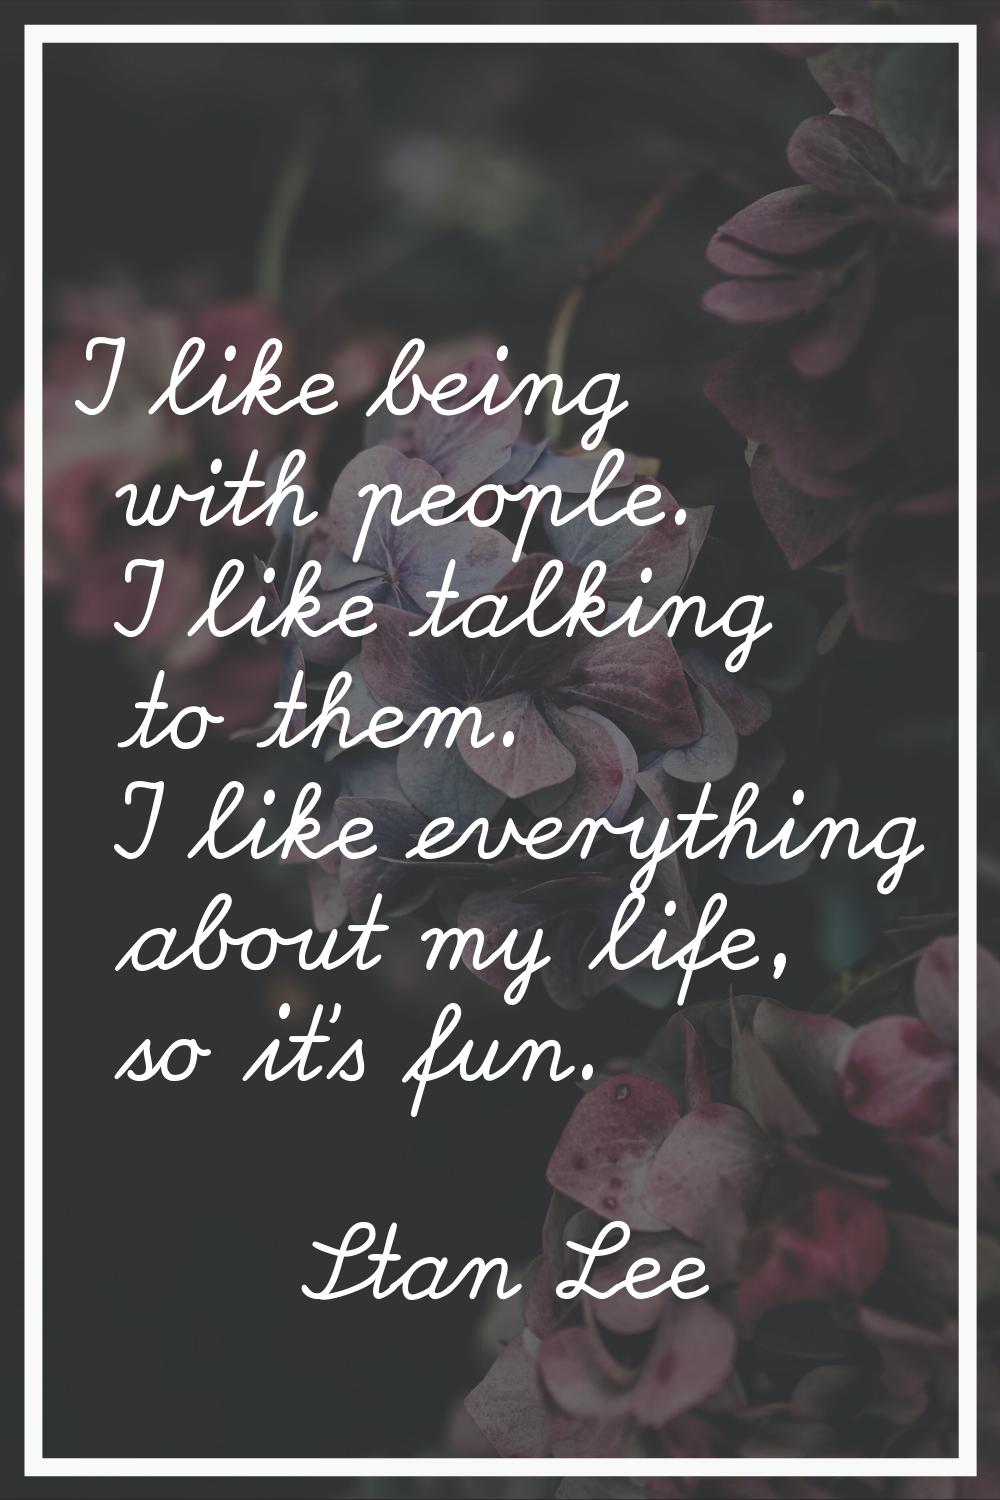 I like being with people. I like talking to them. I like everything about my life, so it's fun.